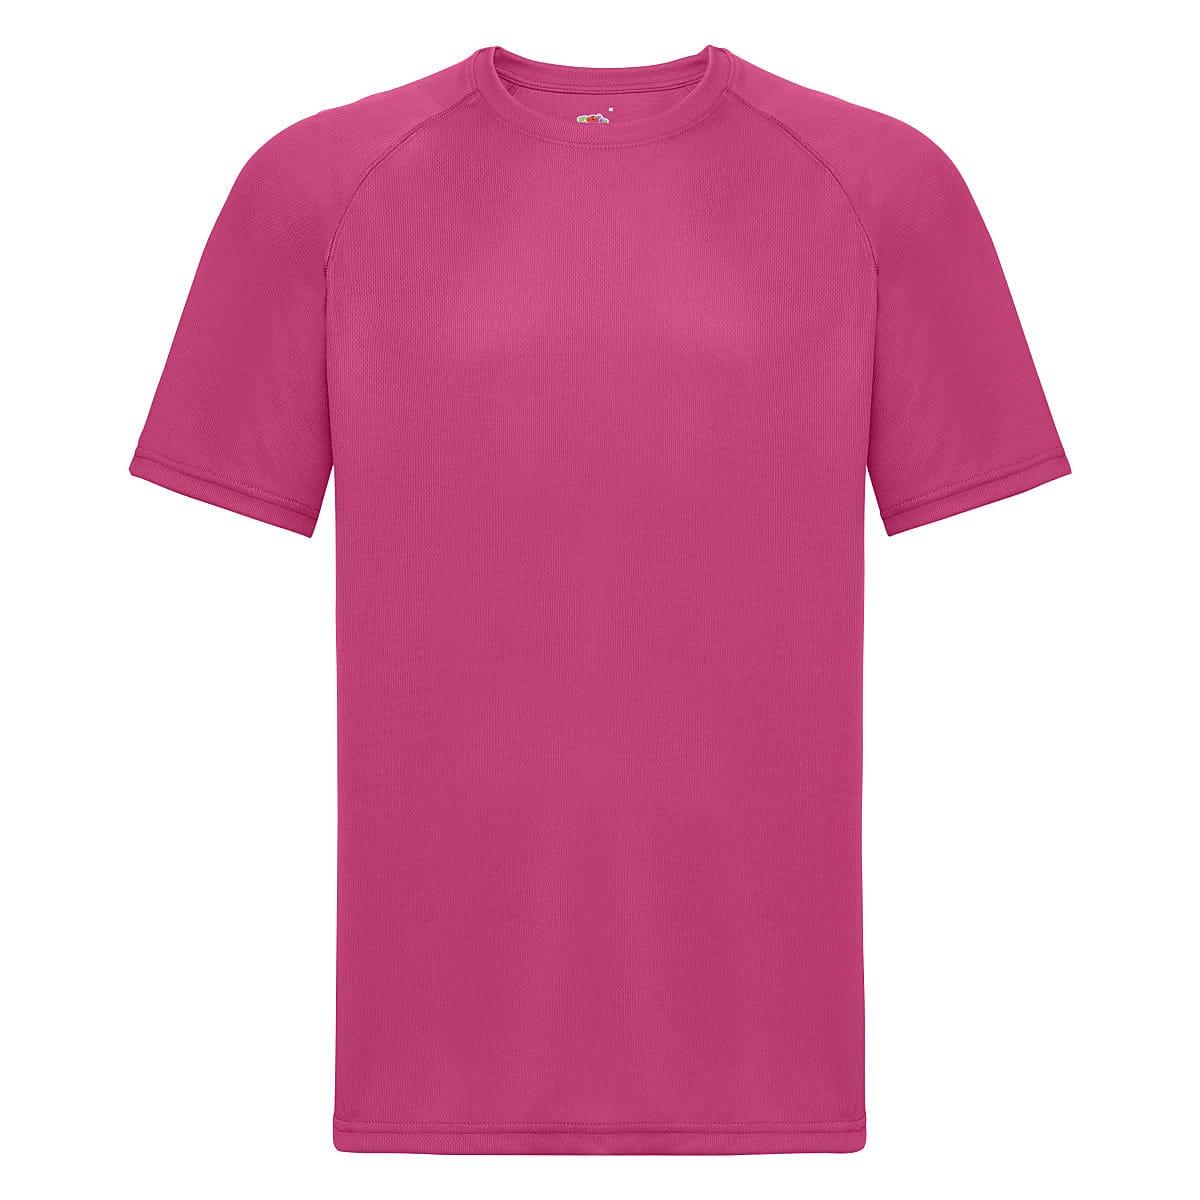 Fruit Of The Loom Mens Performance T-Shirt in Fuchsia (Product Code: 61390)